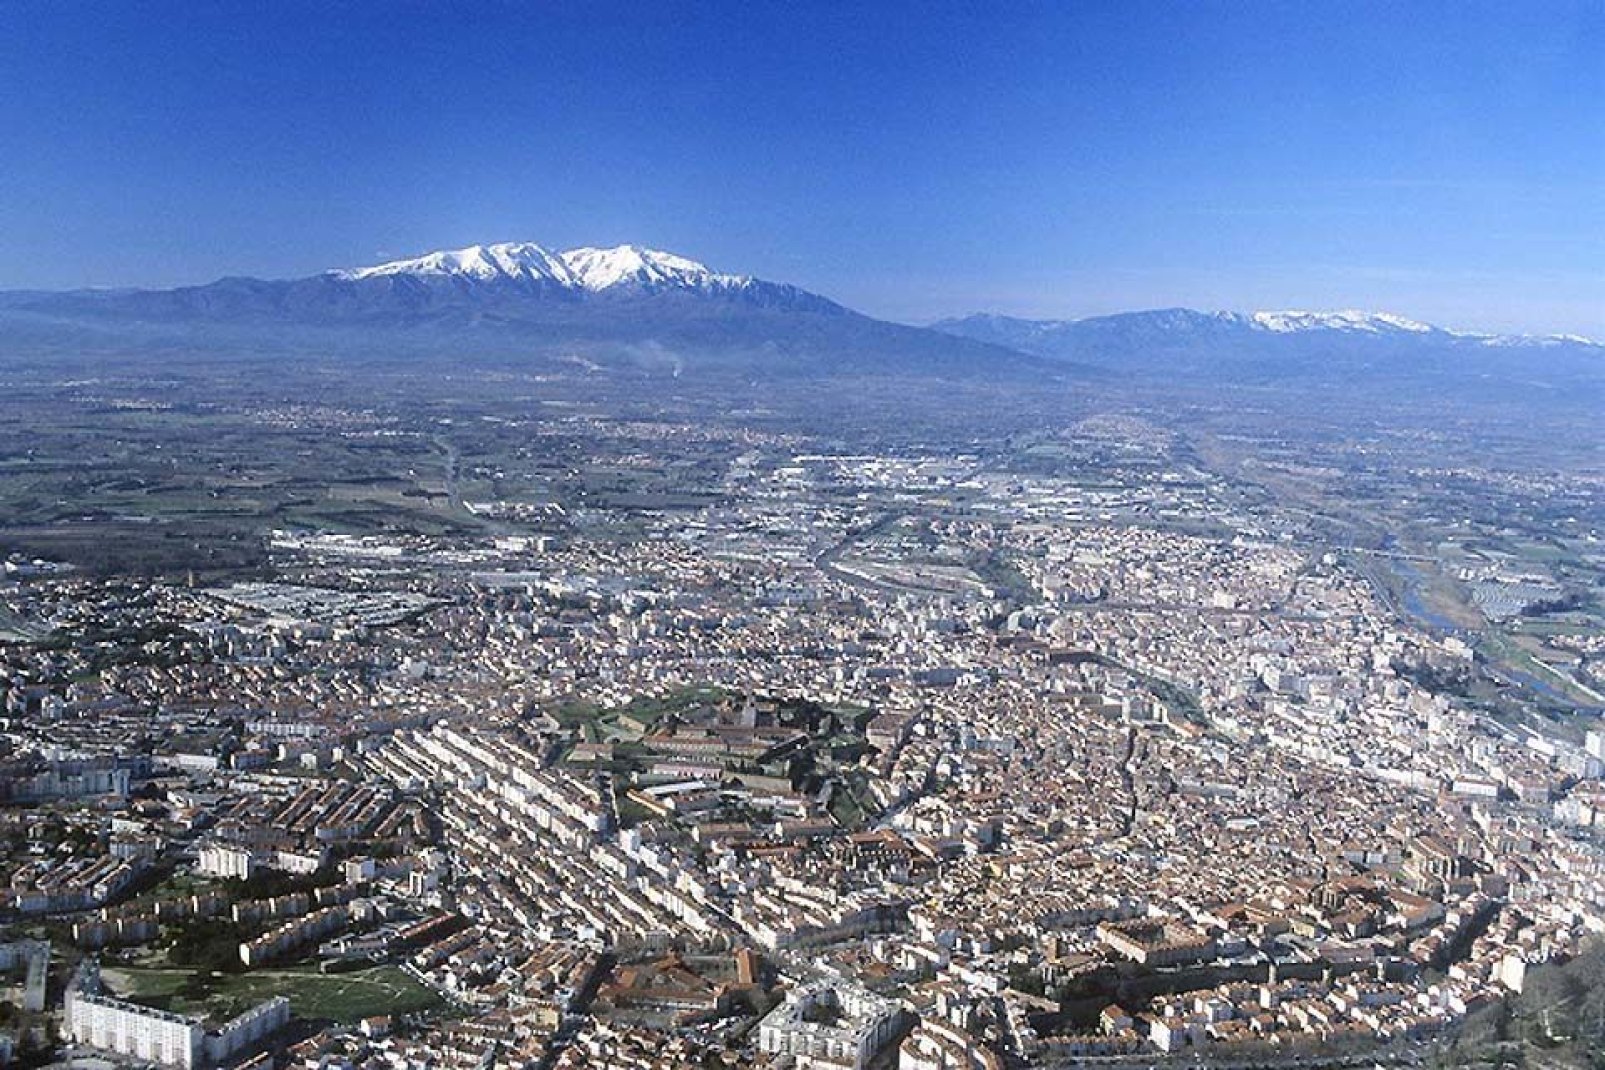 At an altitude of 2,785m, Pic du Canigou is the highest point of the Canigou mountain range. It offers a stunning panoramic view over the Roussillon plain.